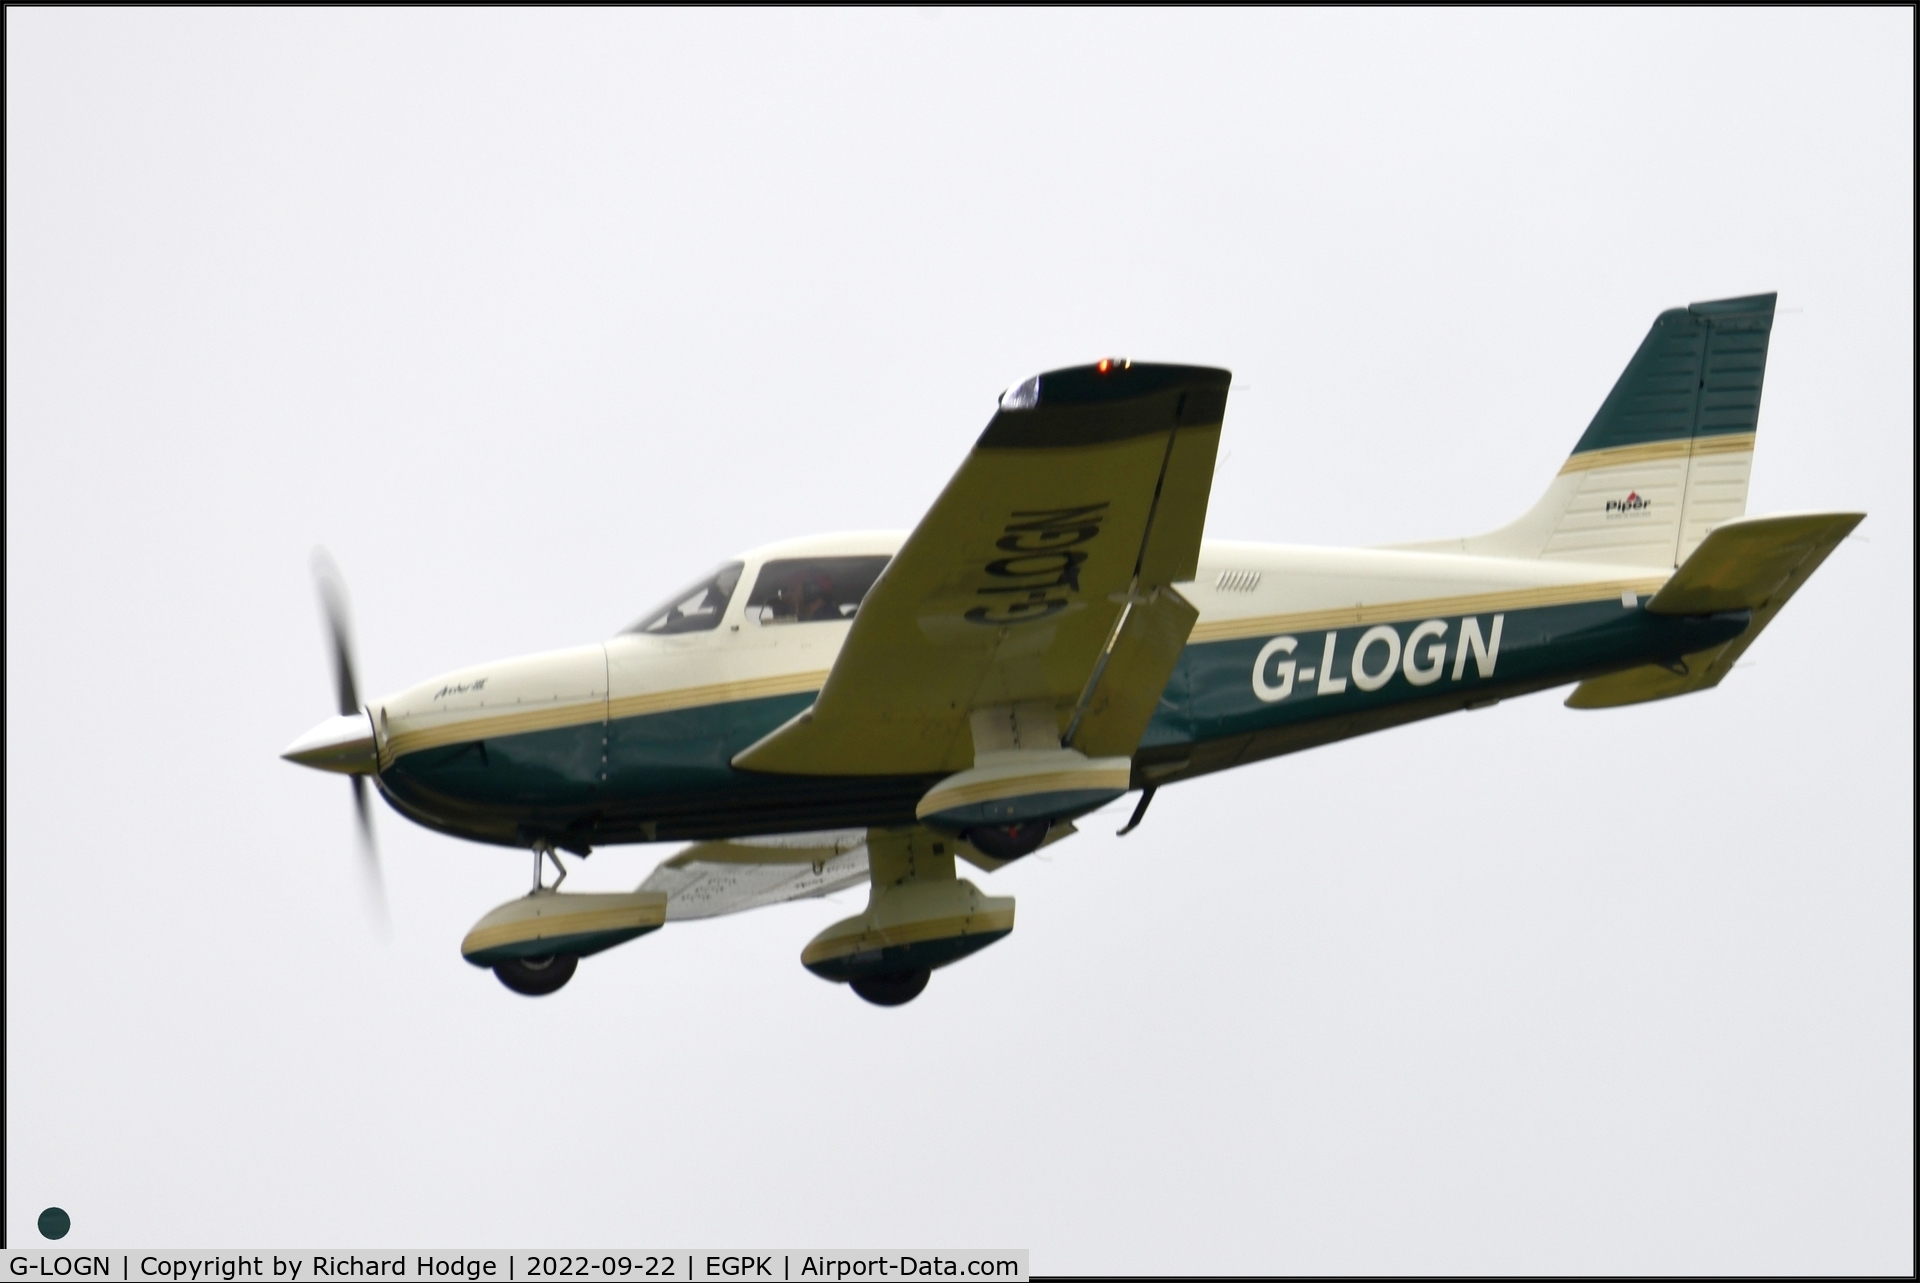 G-LOGN, 1999 Piper PA-28-181 Cherokee Archer III C/N 2843279, On short finals for Rw30 in the rain!